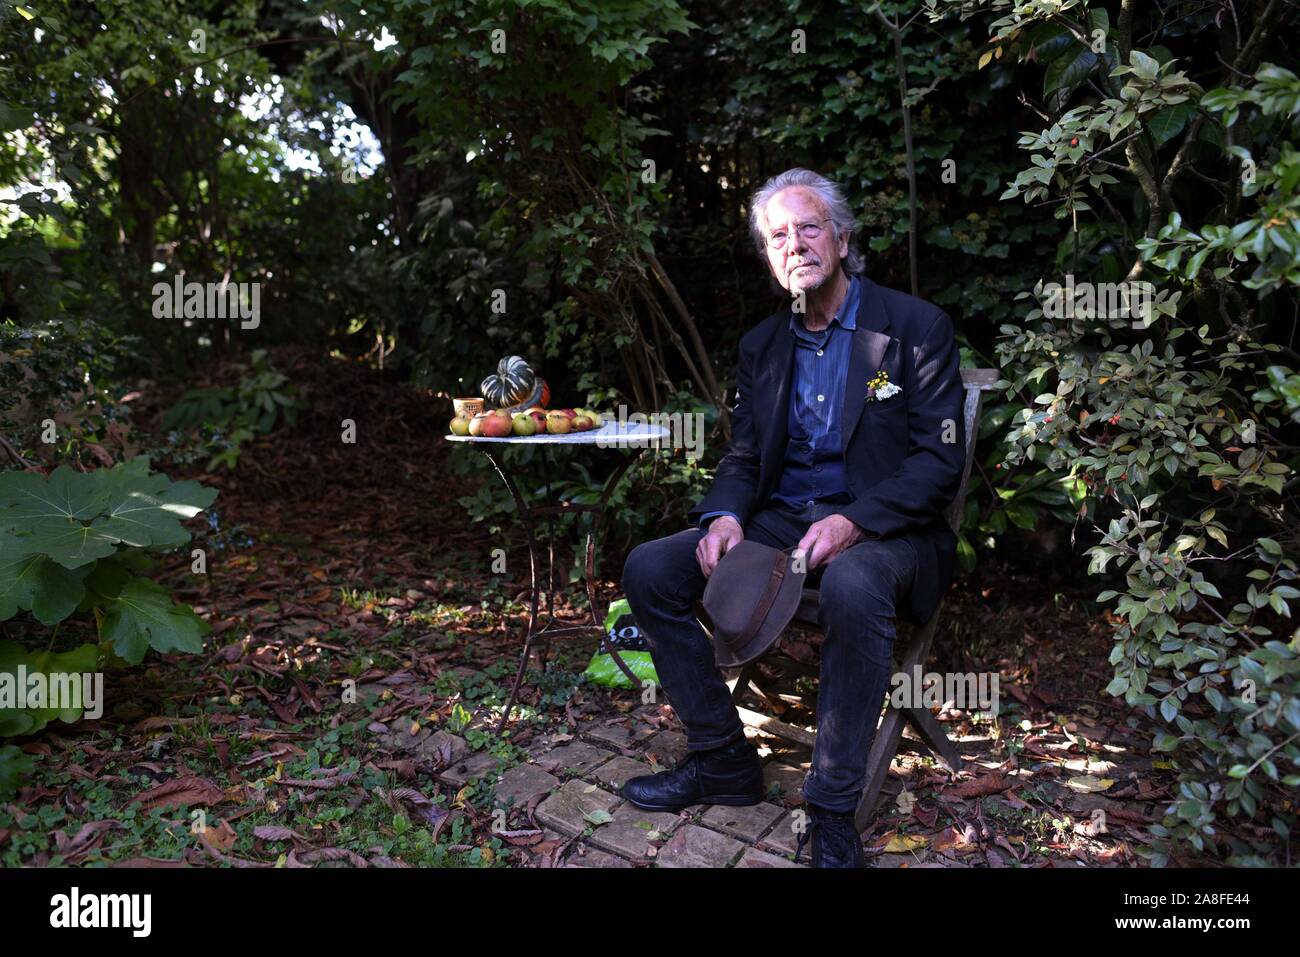 *** STRICTLY NO SALES TO FRENCH MEDIA OR PUBLISHERS *** October 10, 2019 - Chaville, France: Portrait of Austrian author Peter Handke at his home after learning he was awarded the Nobel Prize of Literature 2019. Stock Photo